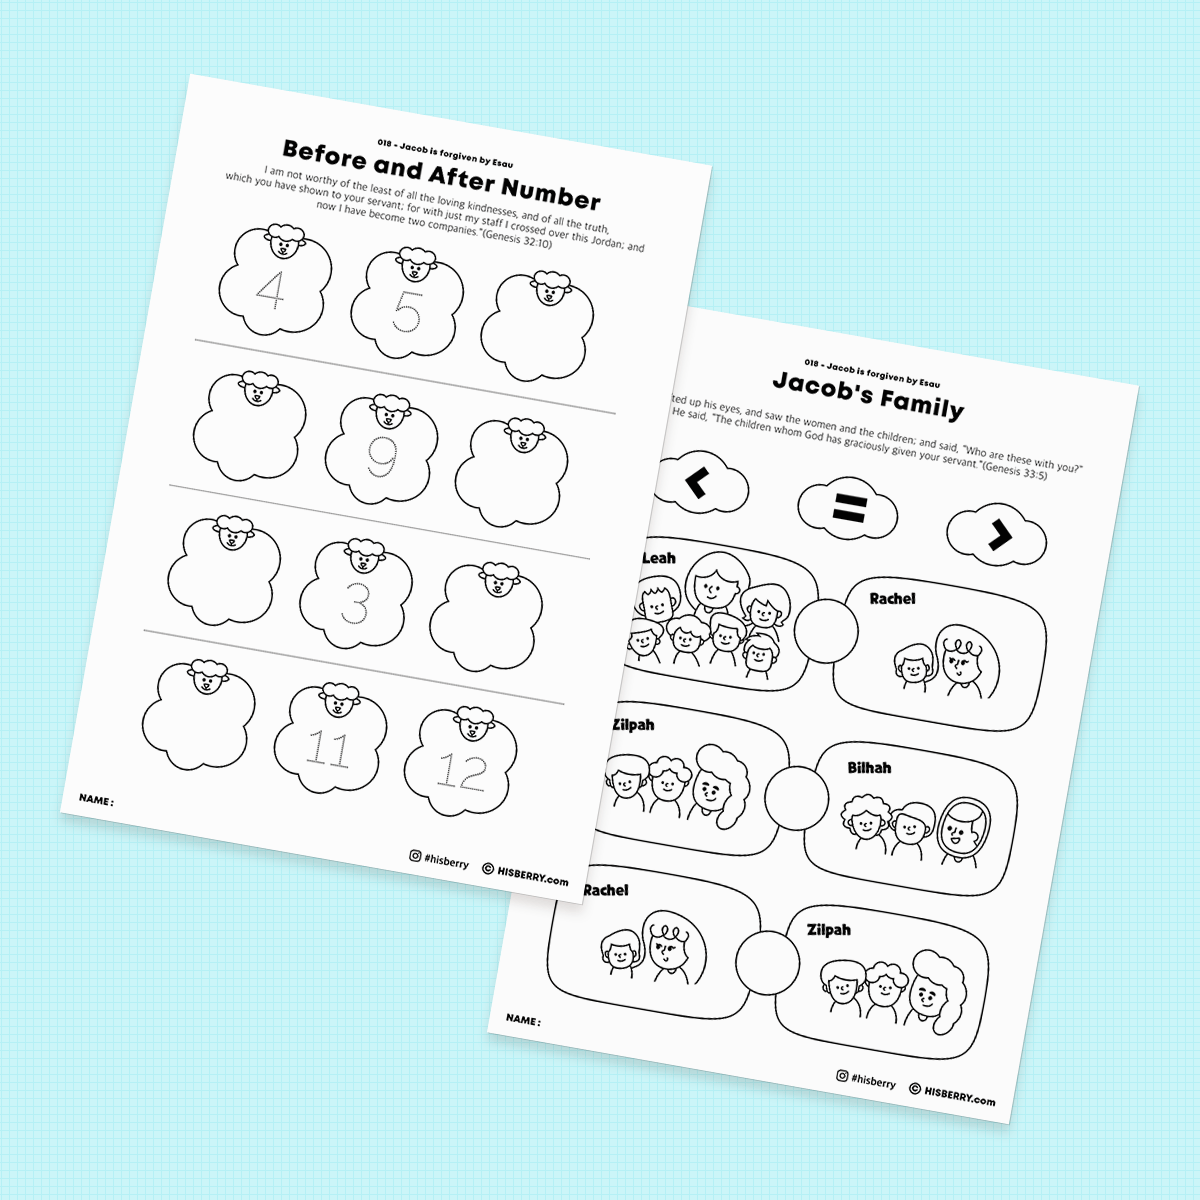 Jacob is forgiven by Esau - Activity Worksheets